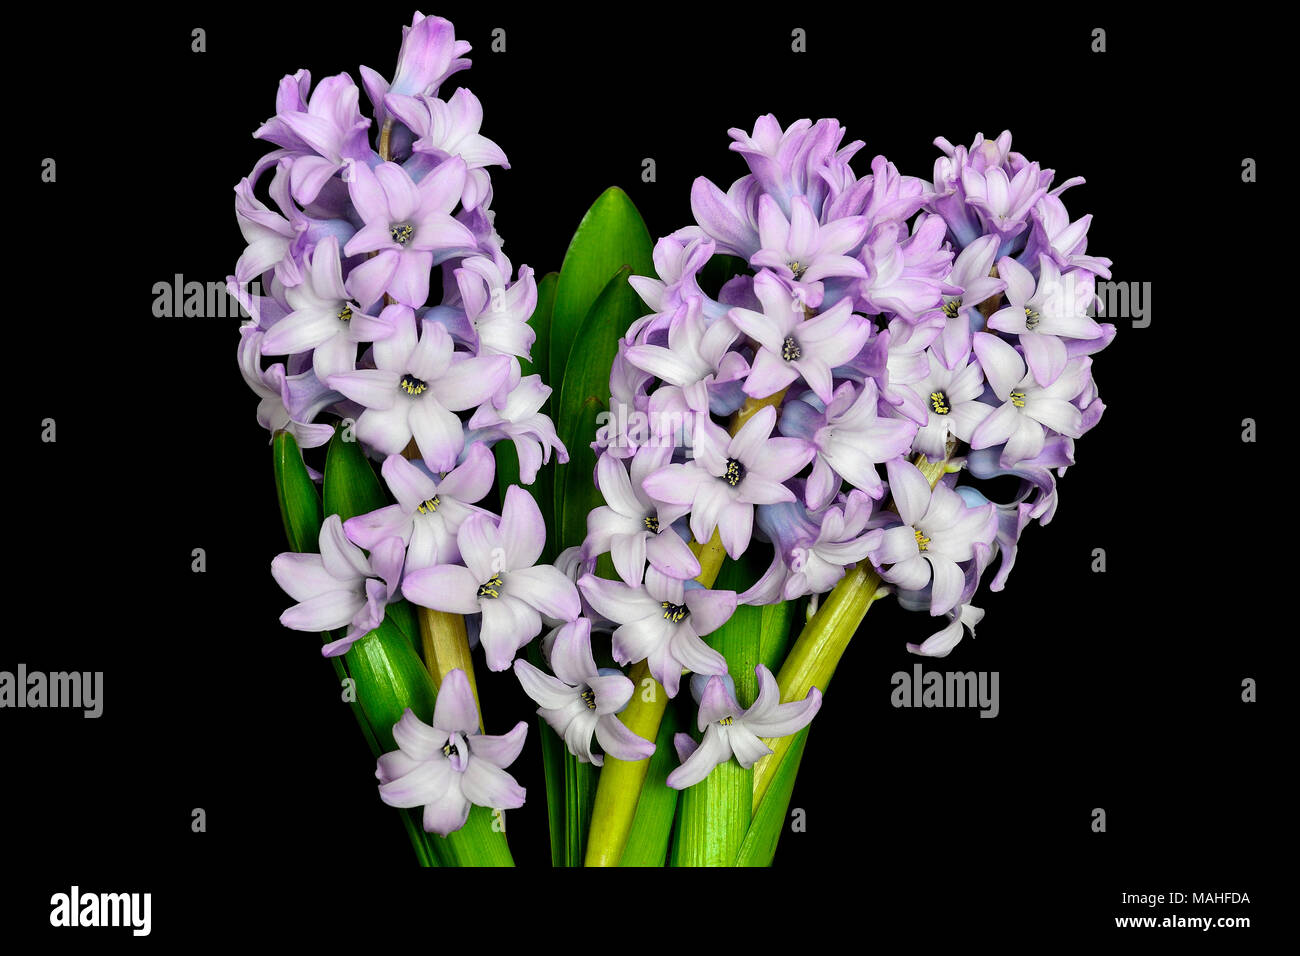 Bouquet from three flowering gentle lilac hyacinth flowers with green leaves close up  on black background isolated - beautiful detail of spring natur Stock Photo